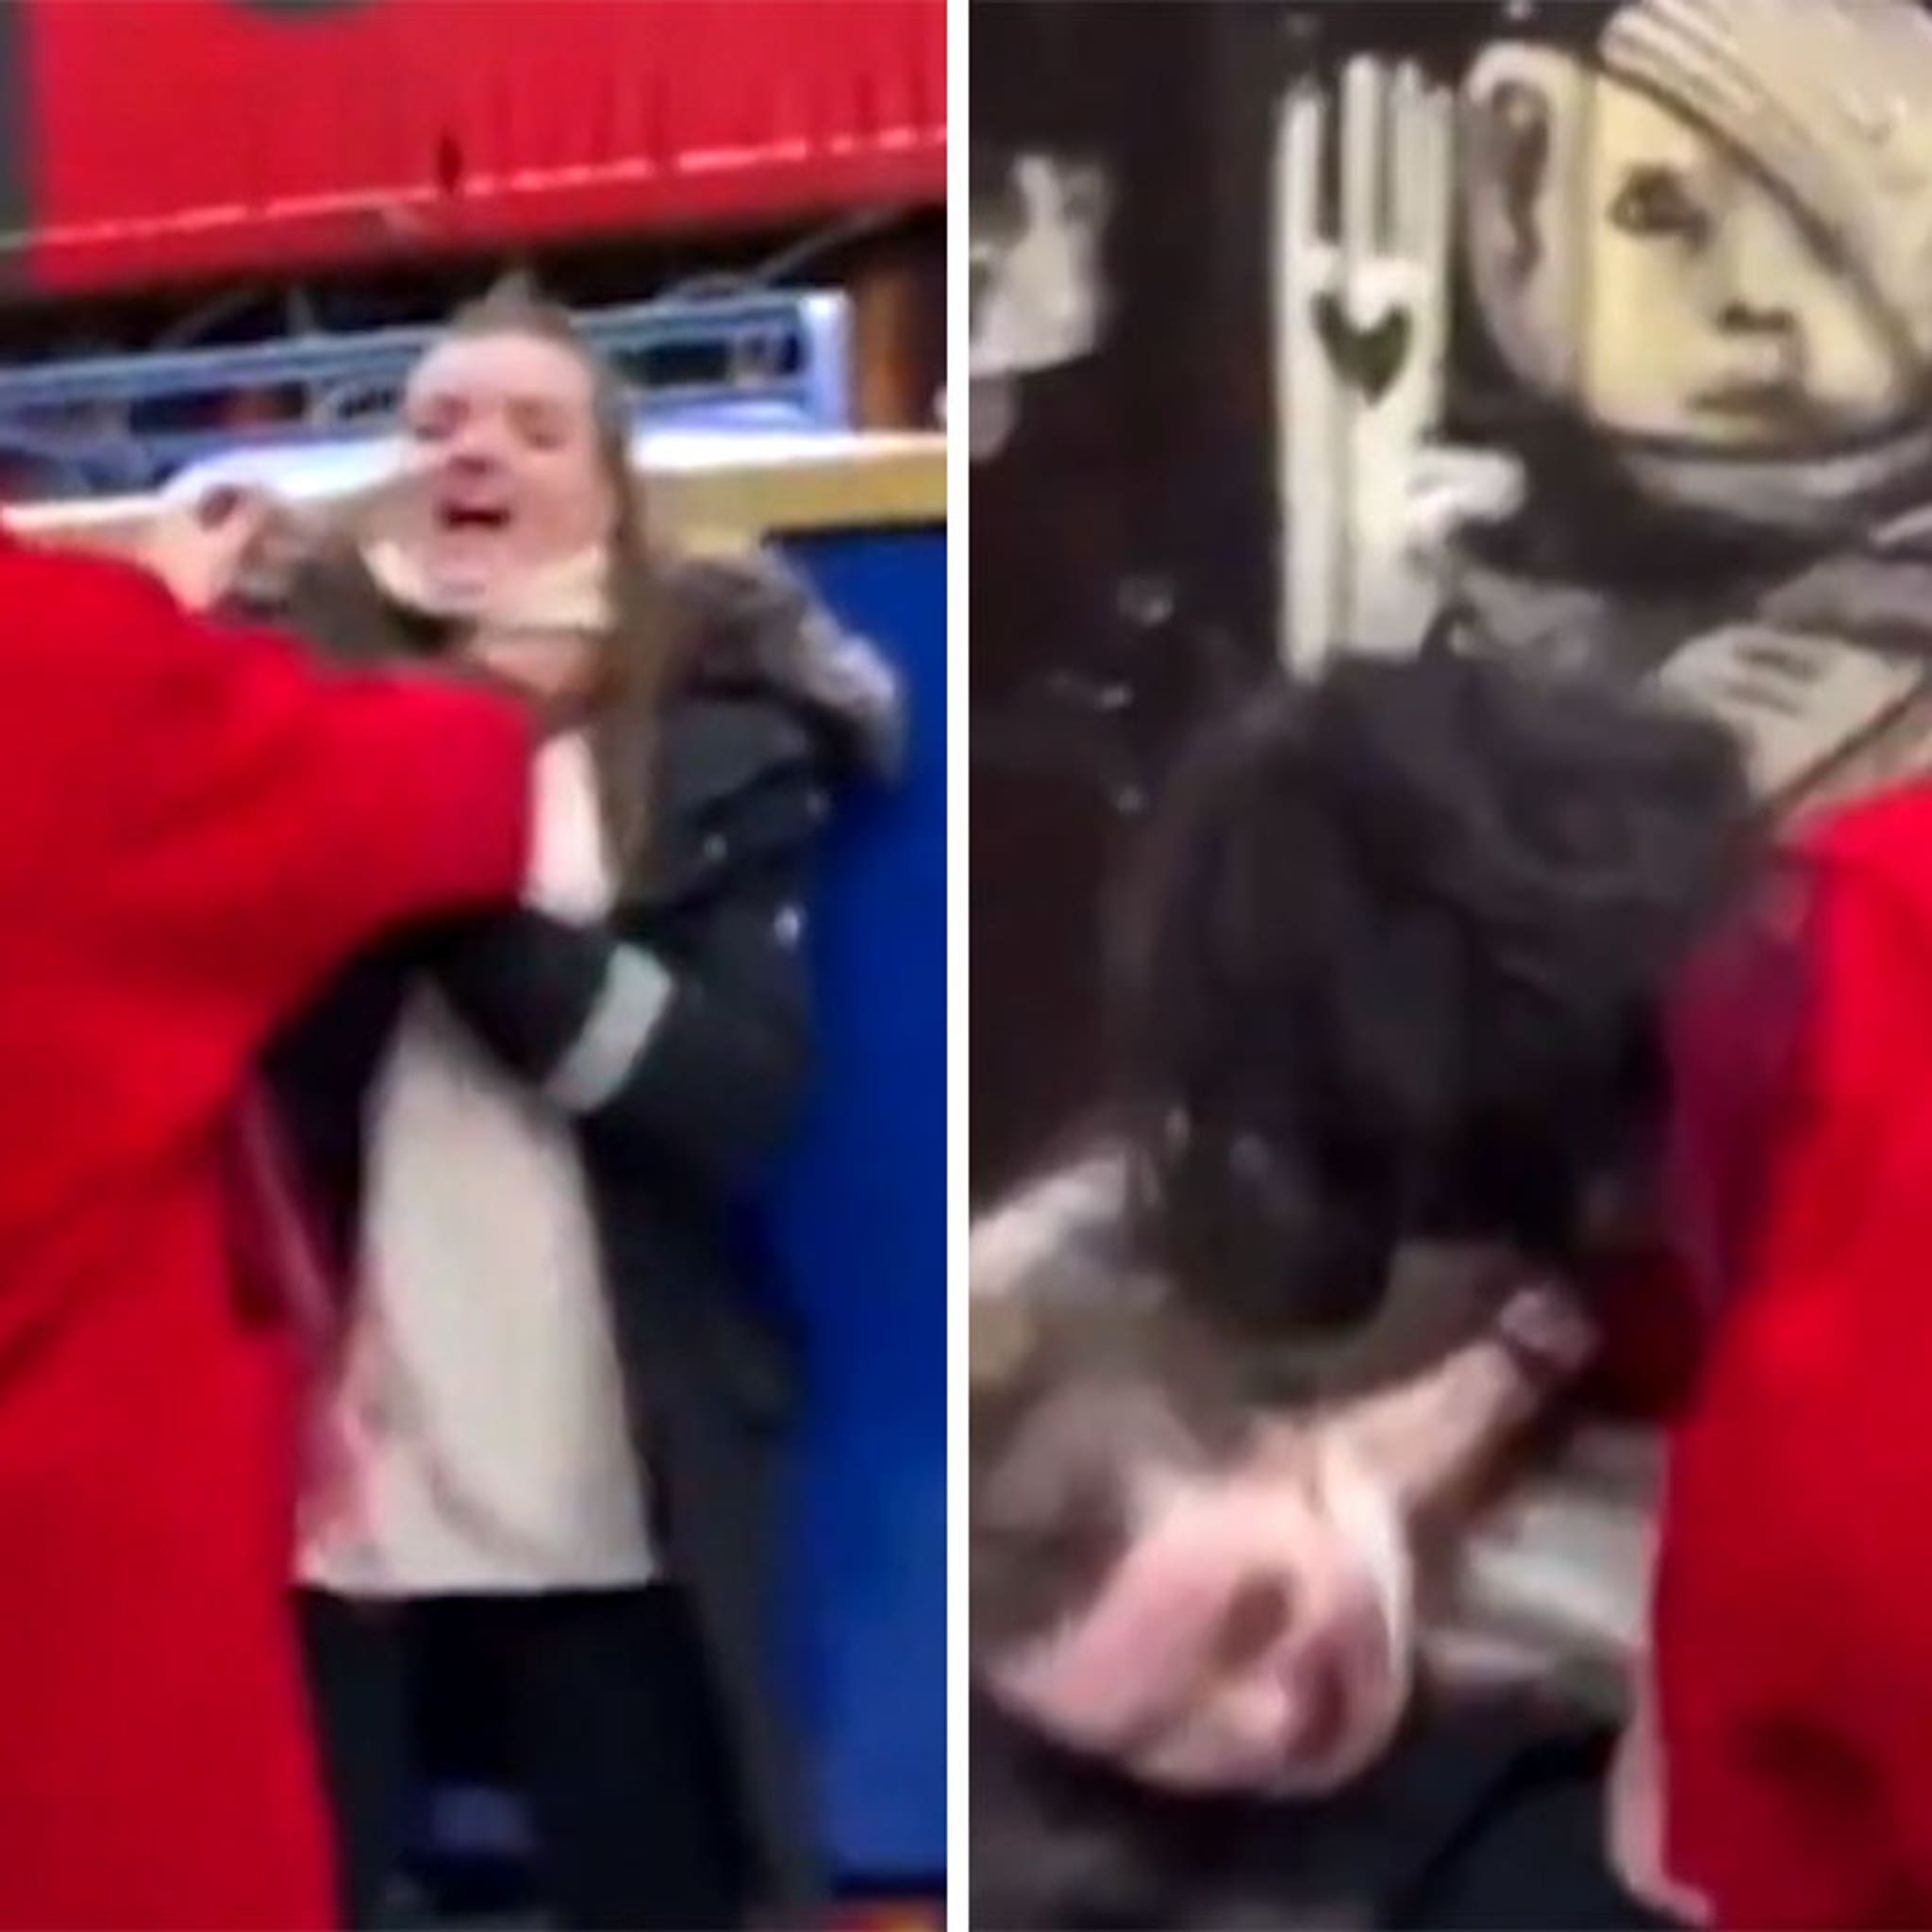 Ezra Miller Appears to Choke Woman at Iceland image image